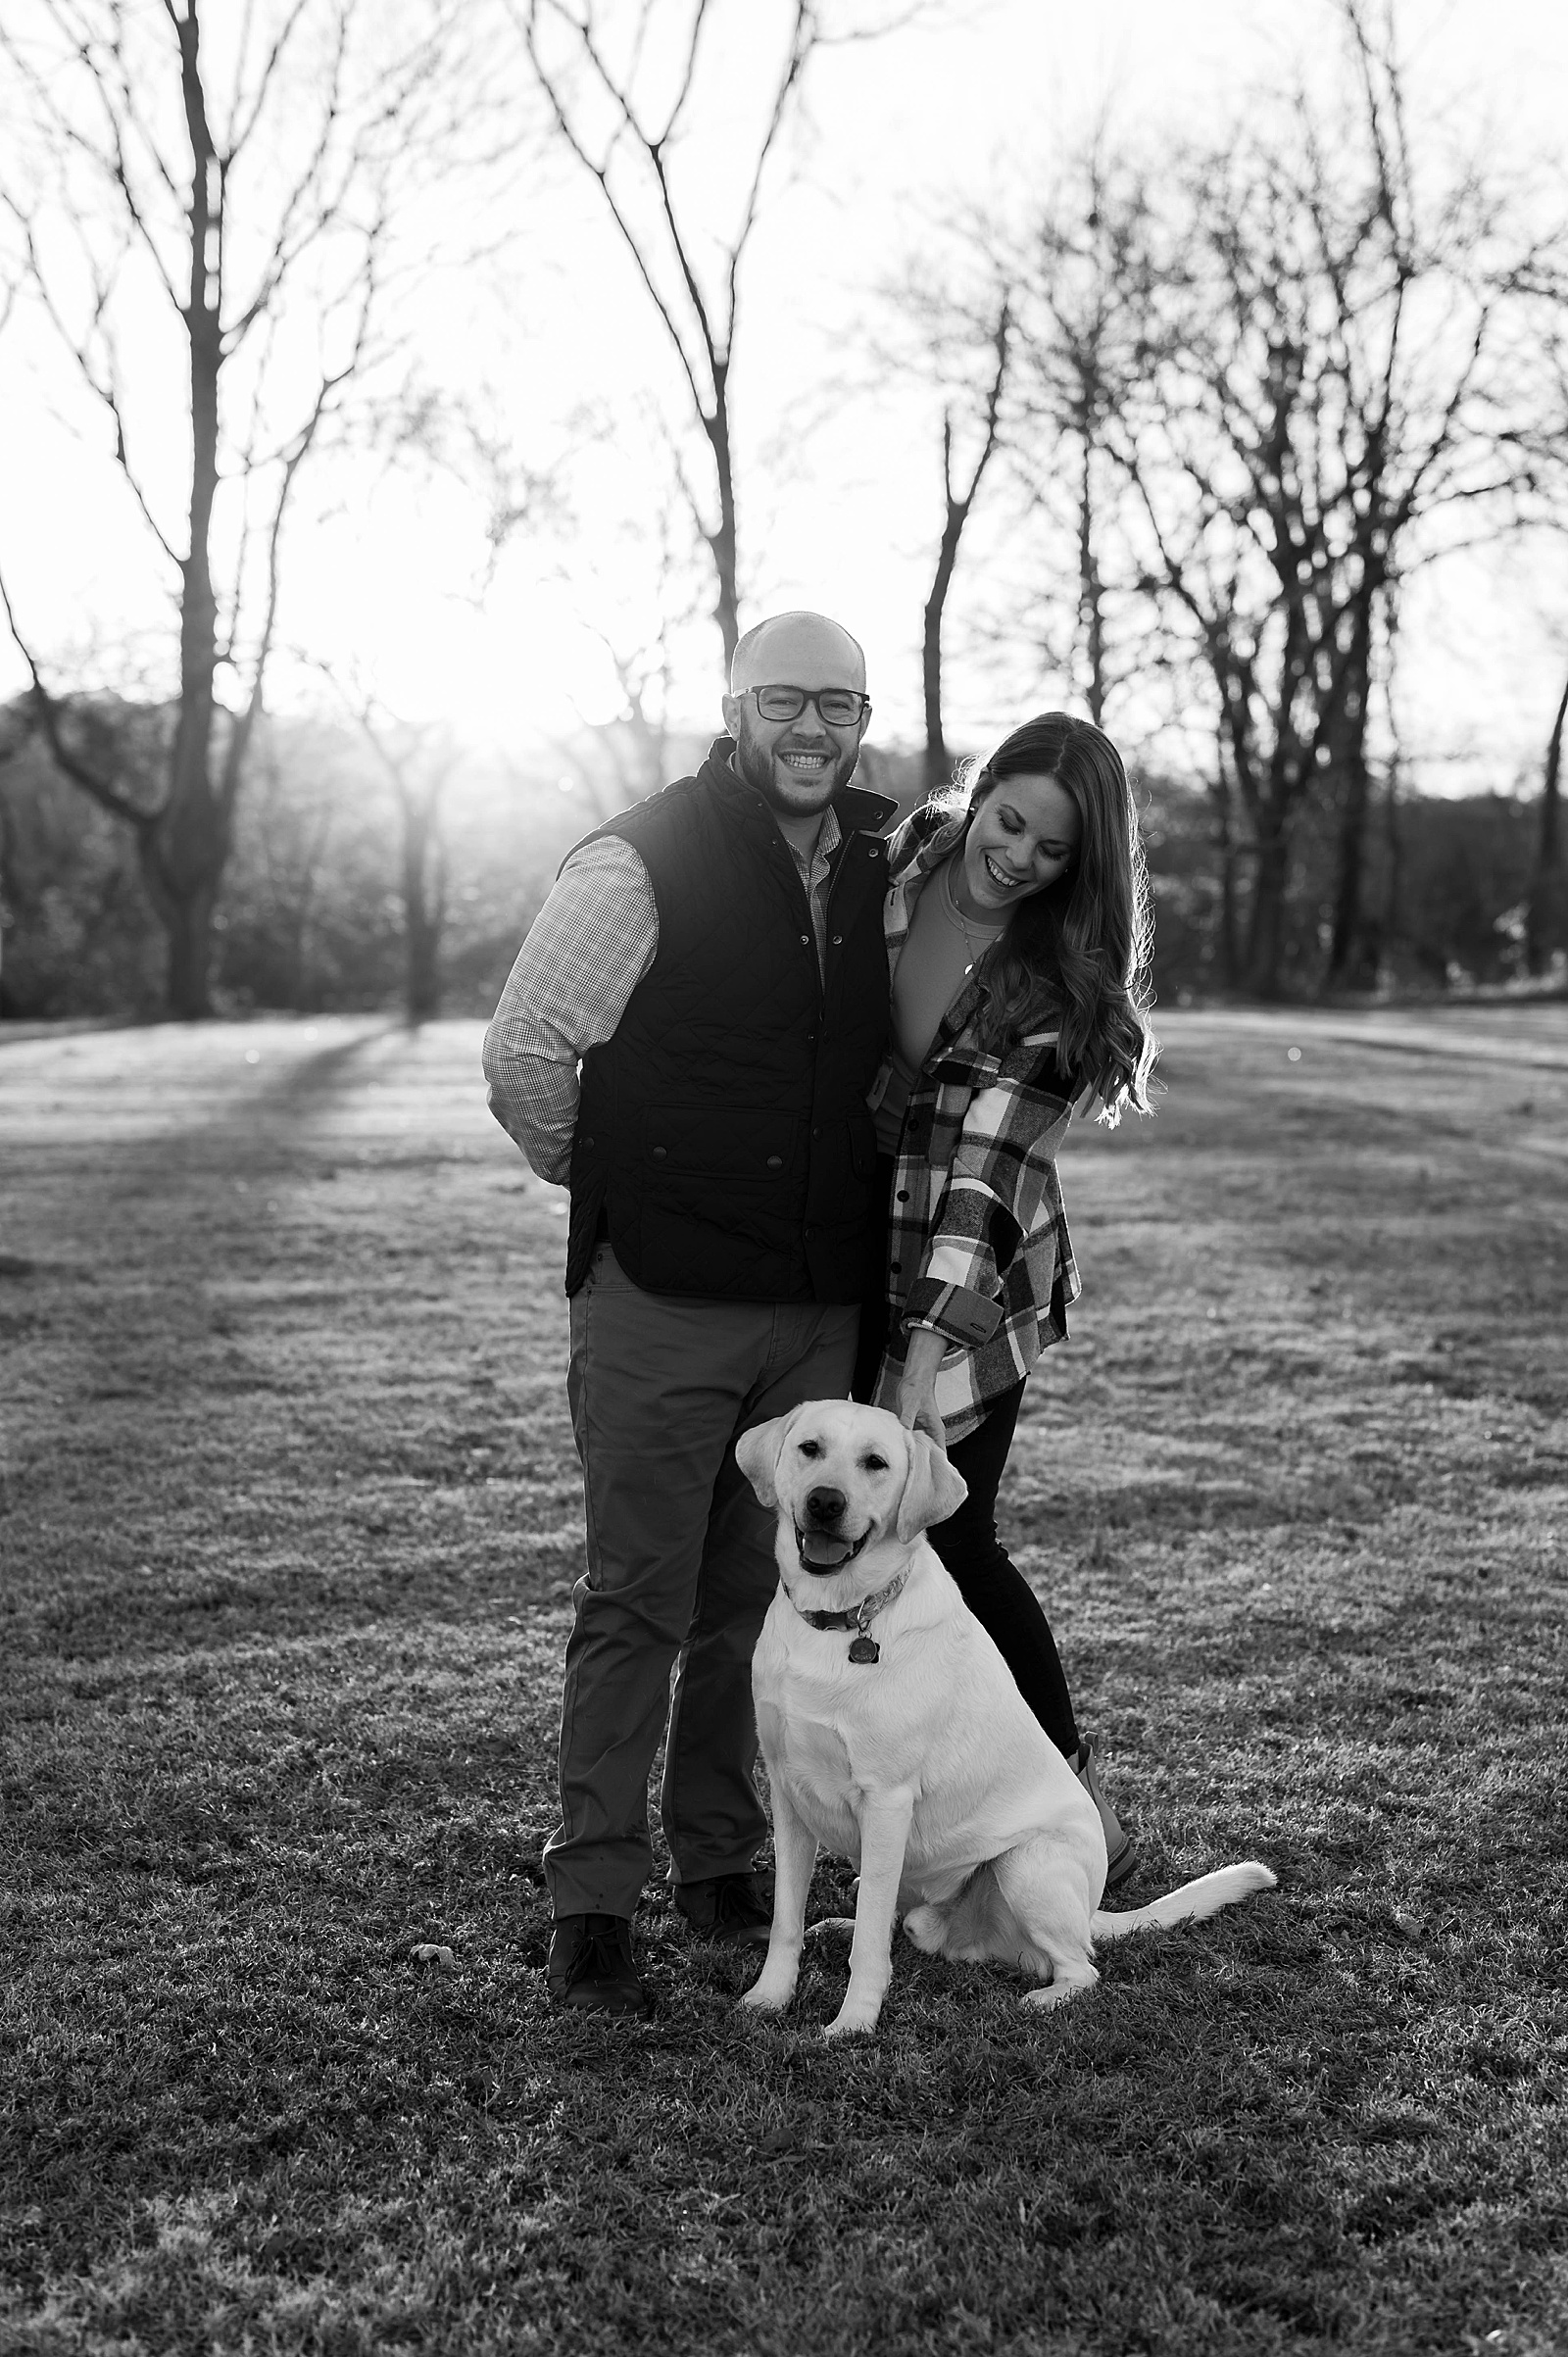 Husband and wife petting dog during golden hour by Hannah Louise photo